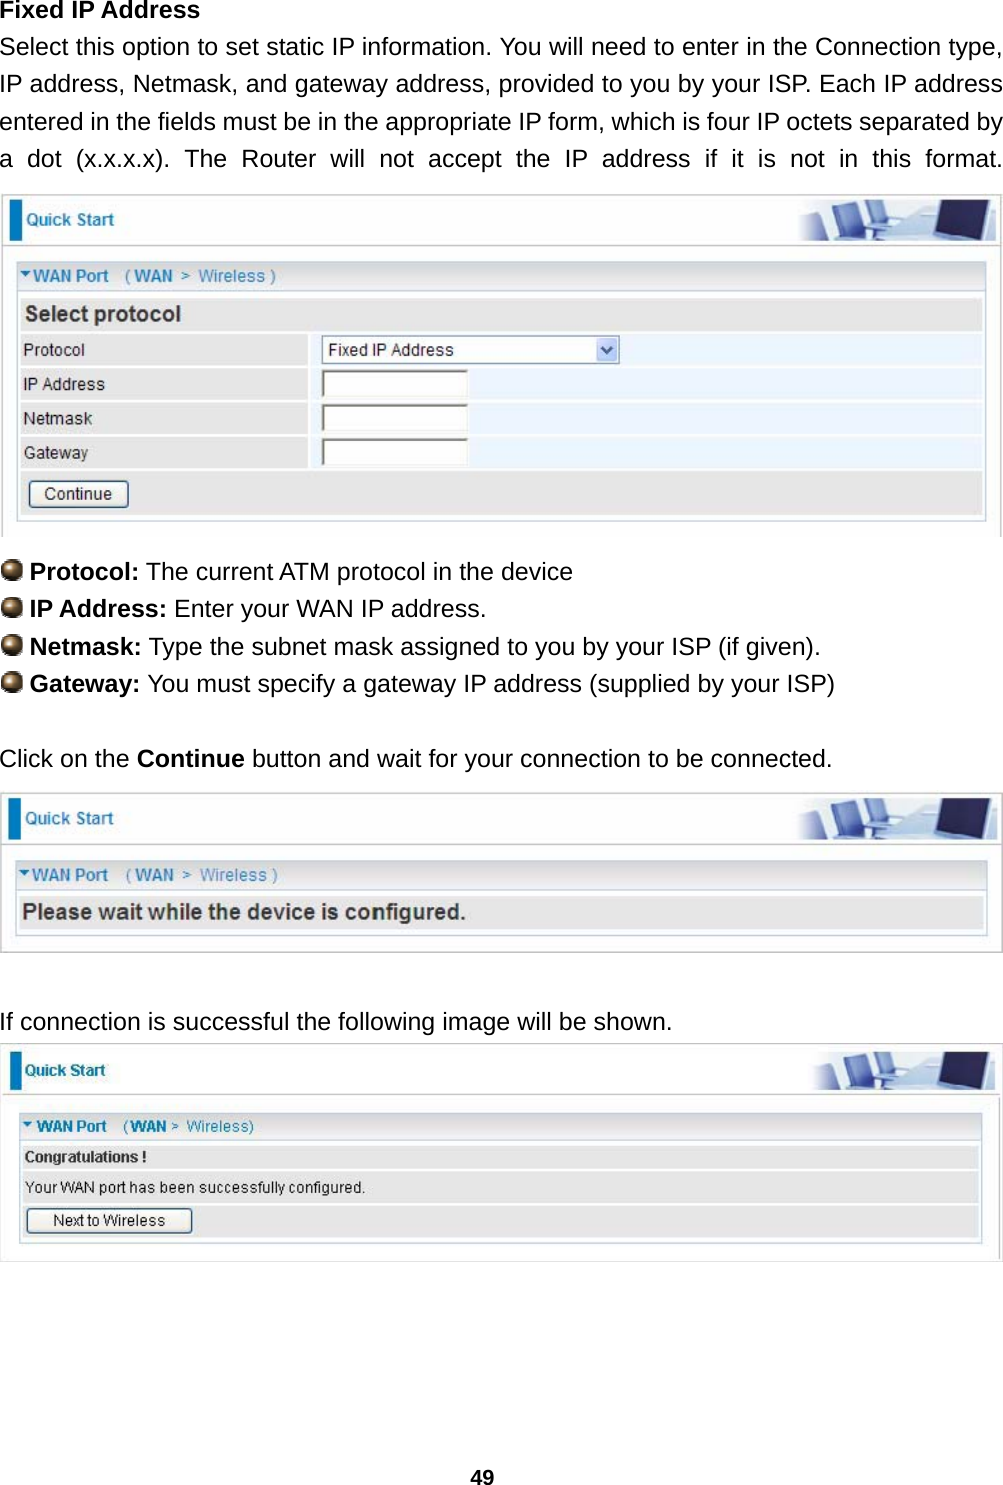 49 Fixed IP Address Select this option to set static IP information. You will need to enter in the Connection type, IP address, Netmask, and gateway address, provided to you by your ISP. Each IP address entered in the fields must be in the appropriate IP form, which is four IP octets separated by a dot (x.x.x.x). The Router will not accept the IP address if it is not in this format.    Protocol: The current ATM protocol in the device   IP Address: Enter your WAN IP address.   Netmask: Type the subnet mask assigned to you by your ISP (if given).  Gateway: You must specify a gateway IP address (supplied by your ISP)  Click on the Continue button and wait for your connection to be connected.   If connection is successful the following image will be shown.      